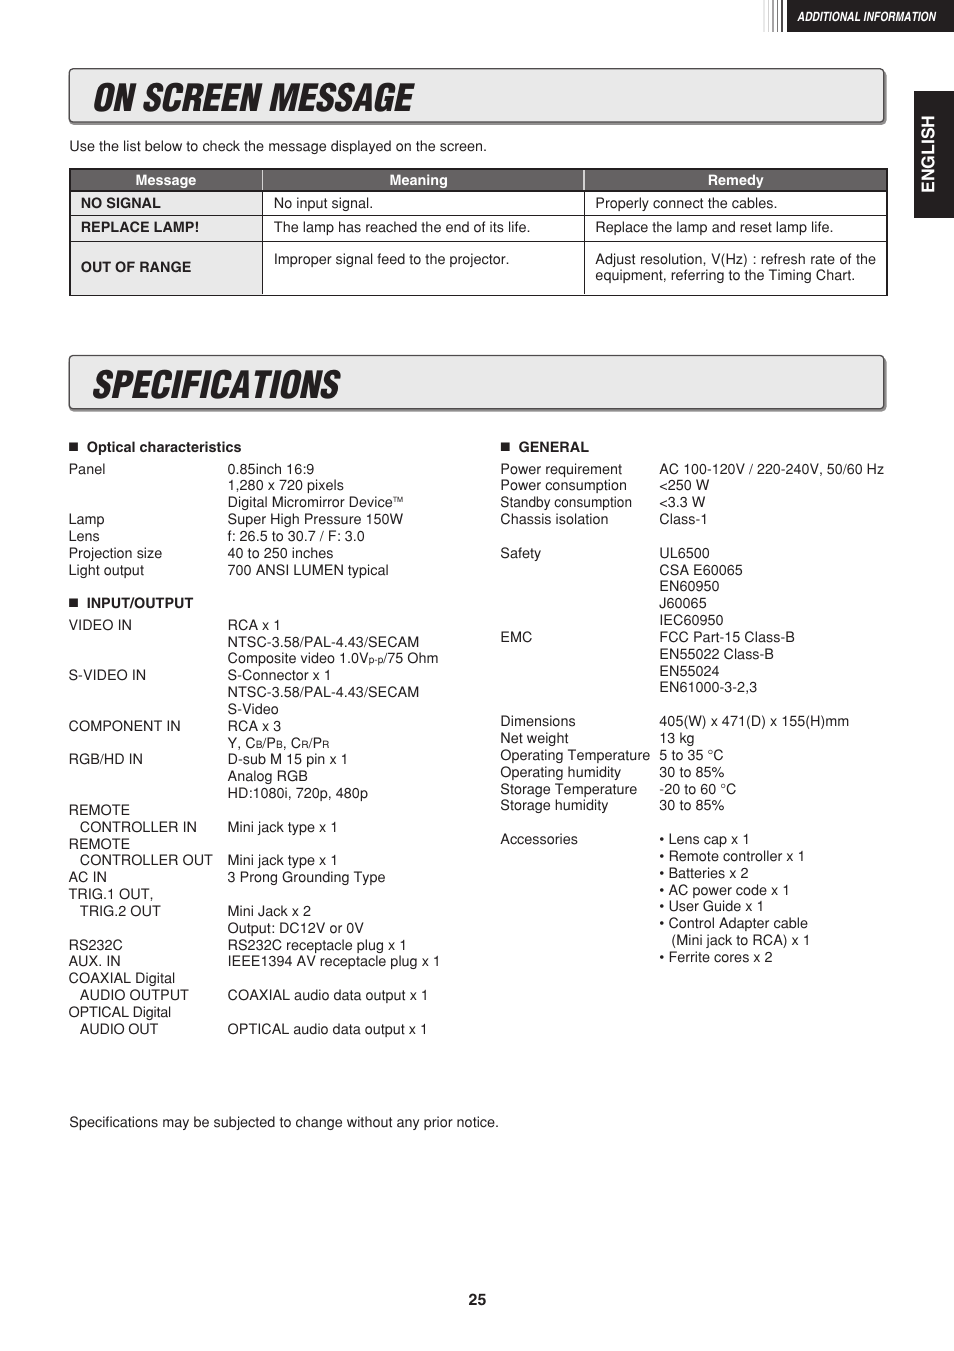 Specifications, On screen message | Marantz VP-12S1N User Manual | Page 27 / 31